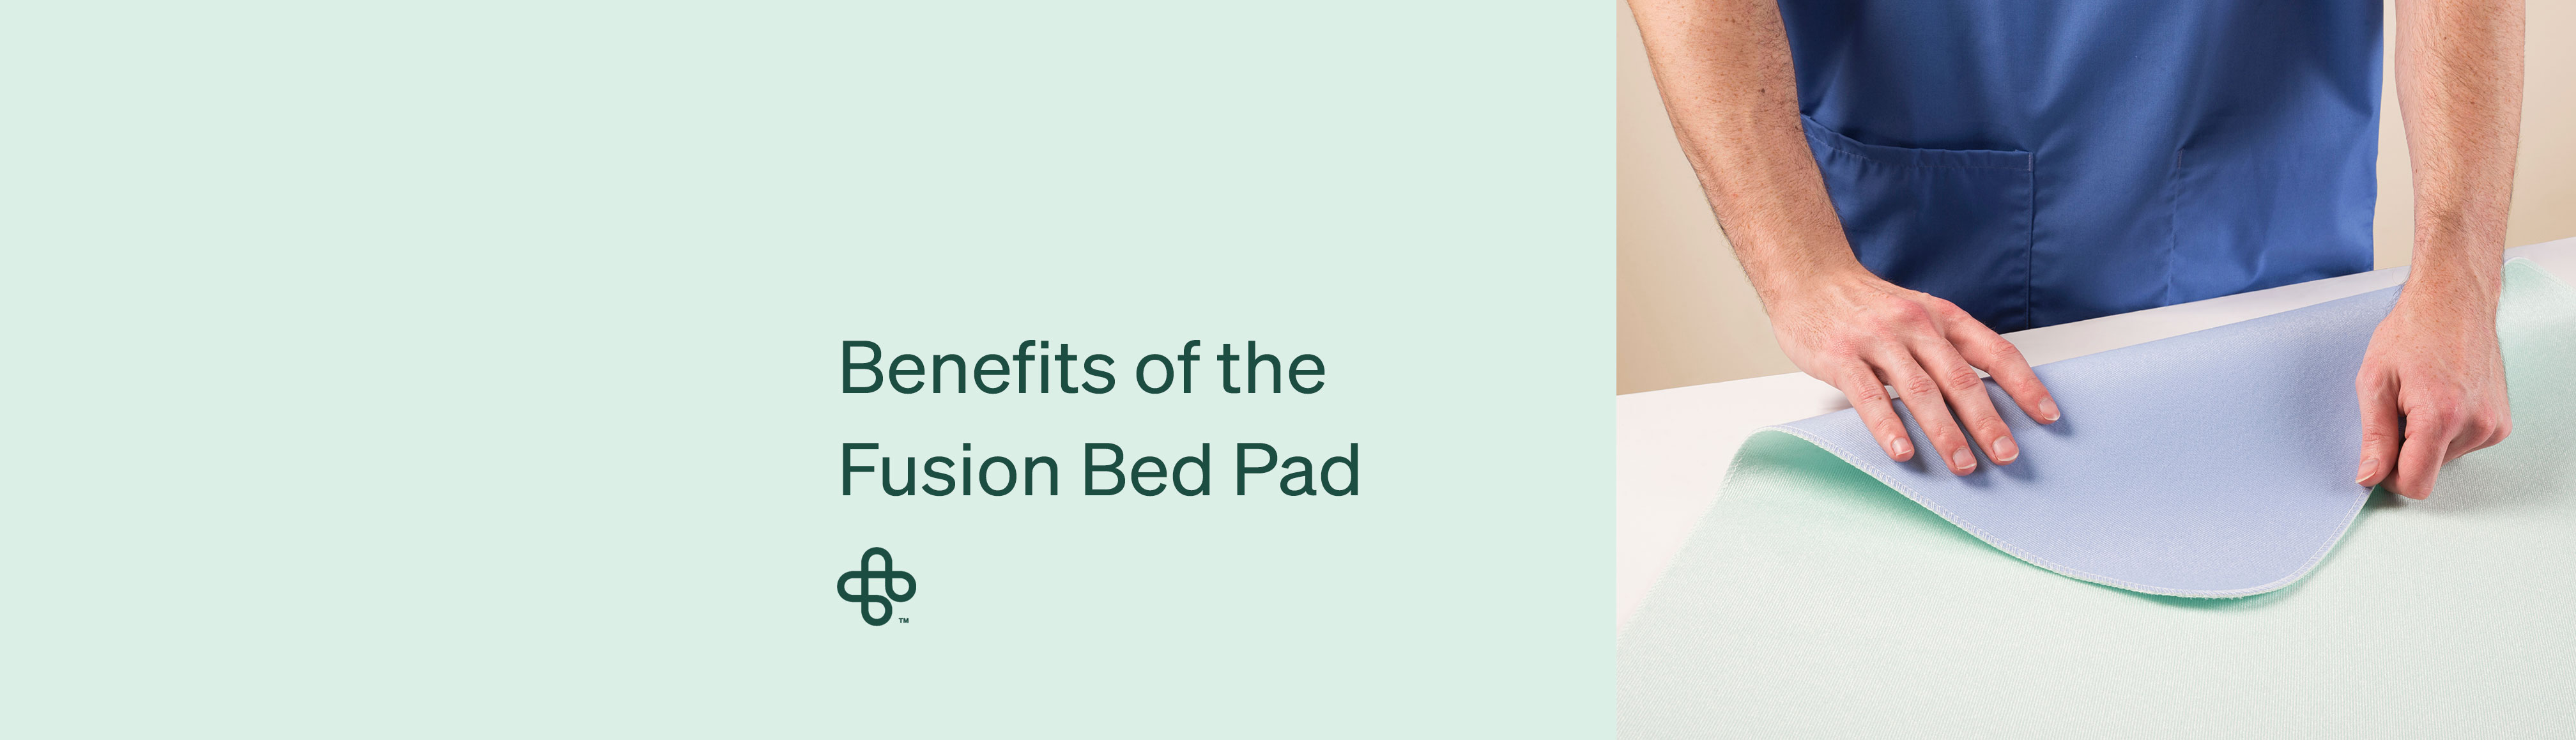 Benefits of the Fusion Bed Pad